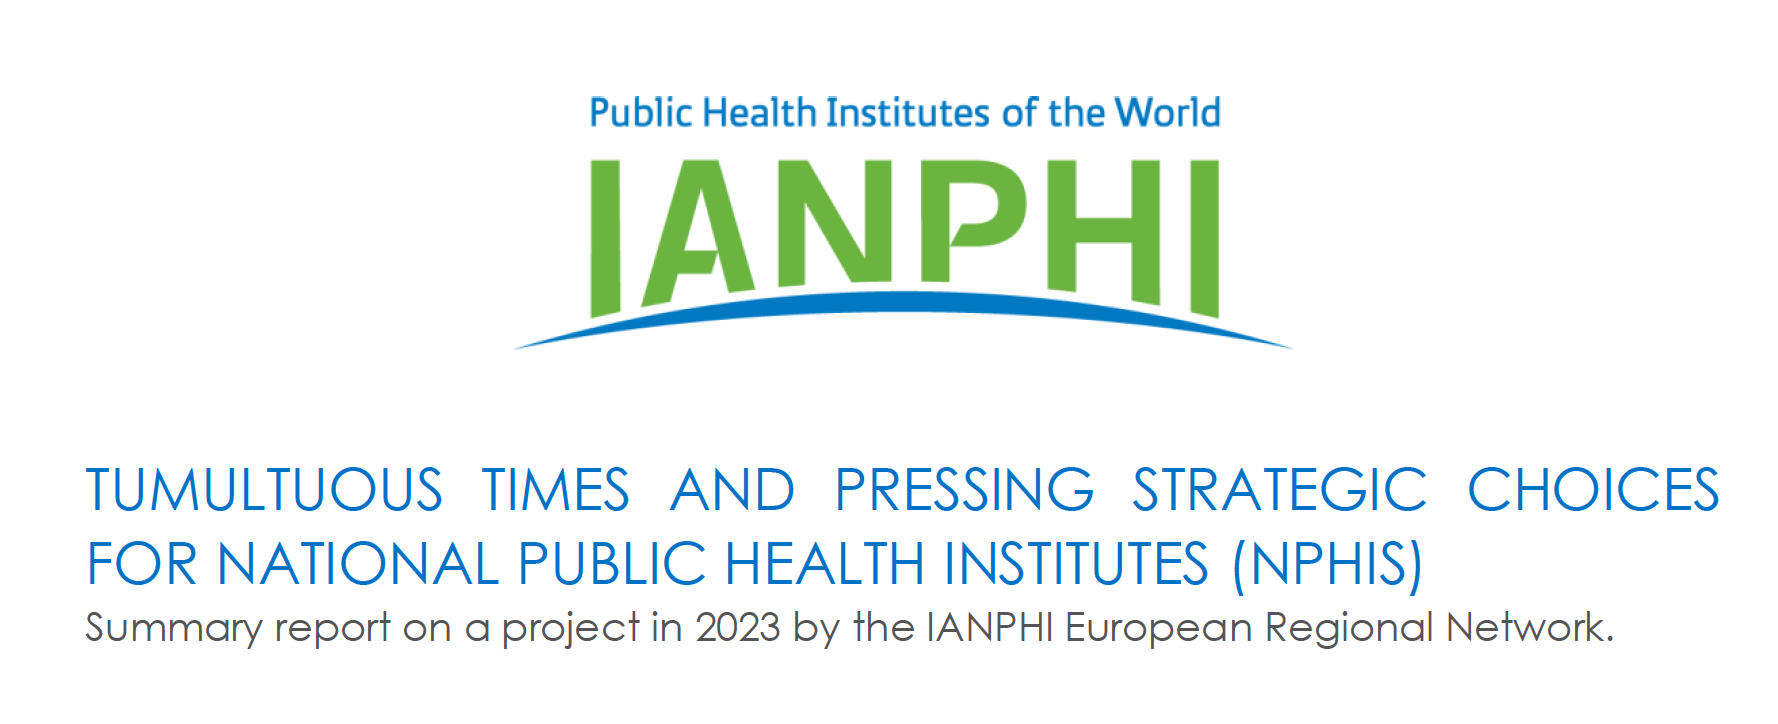 Tumultous Times and Pressing Strategic Choices for National Public Health Institutes 